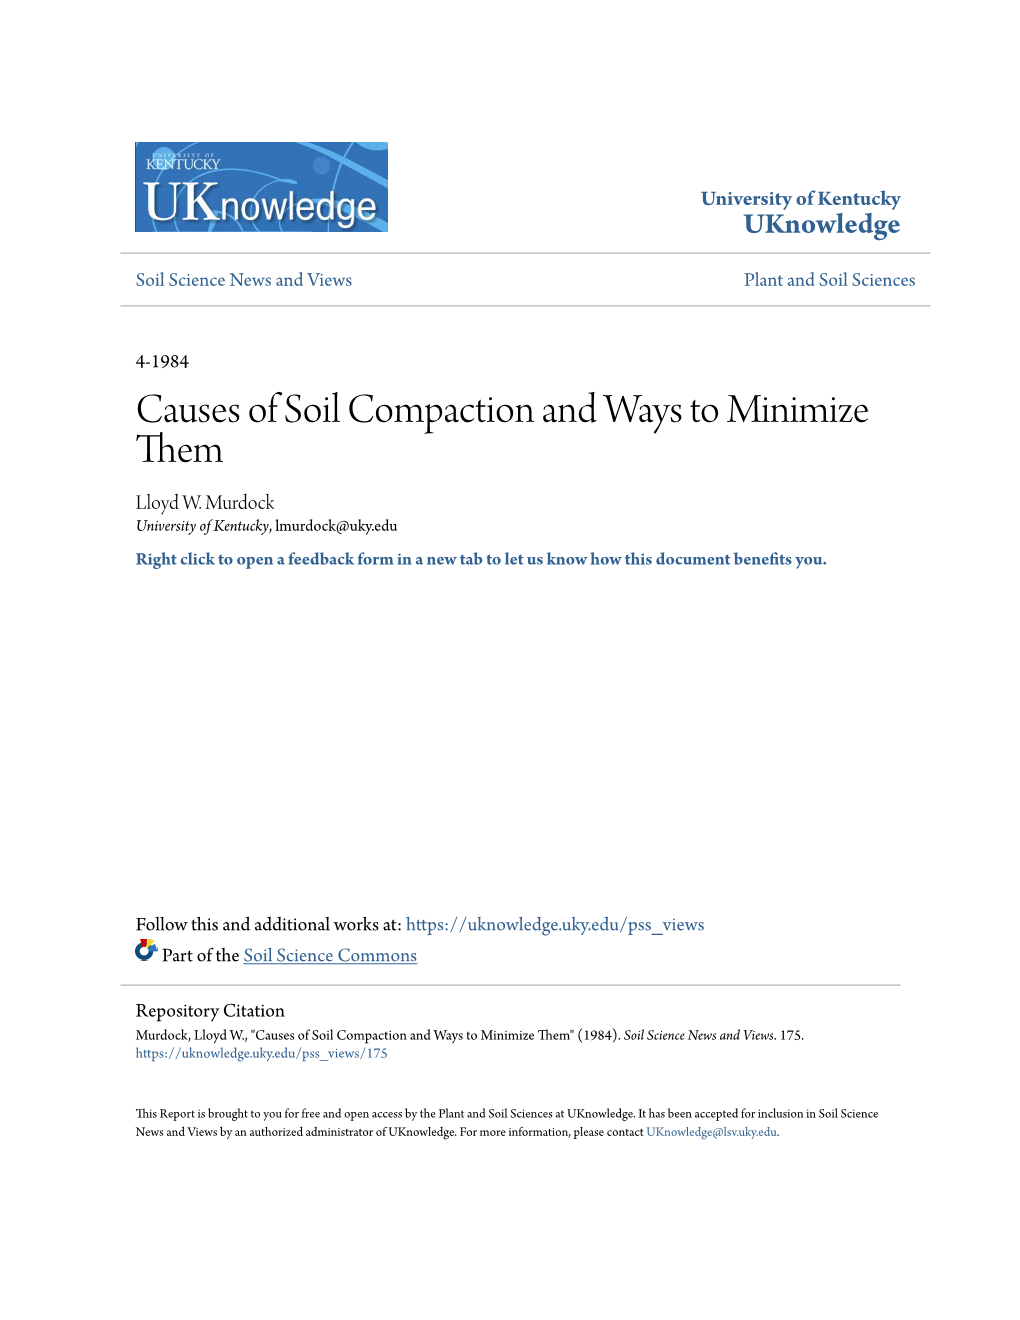 Causes of Soil Compaction and Ways to Minimize Them Lloyd W